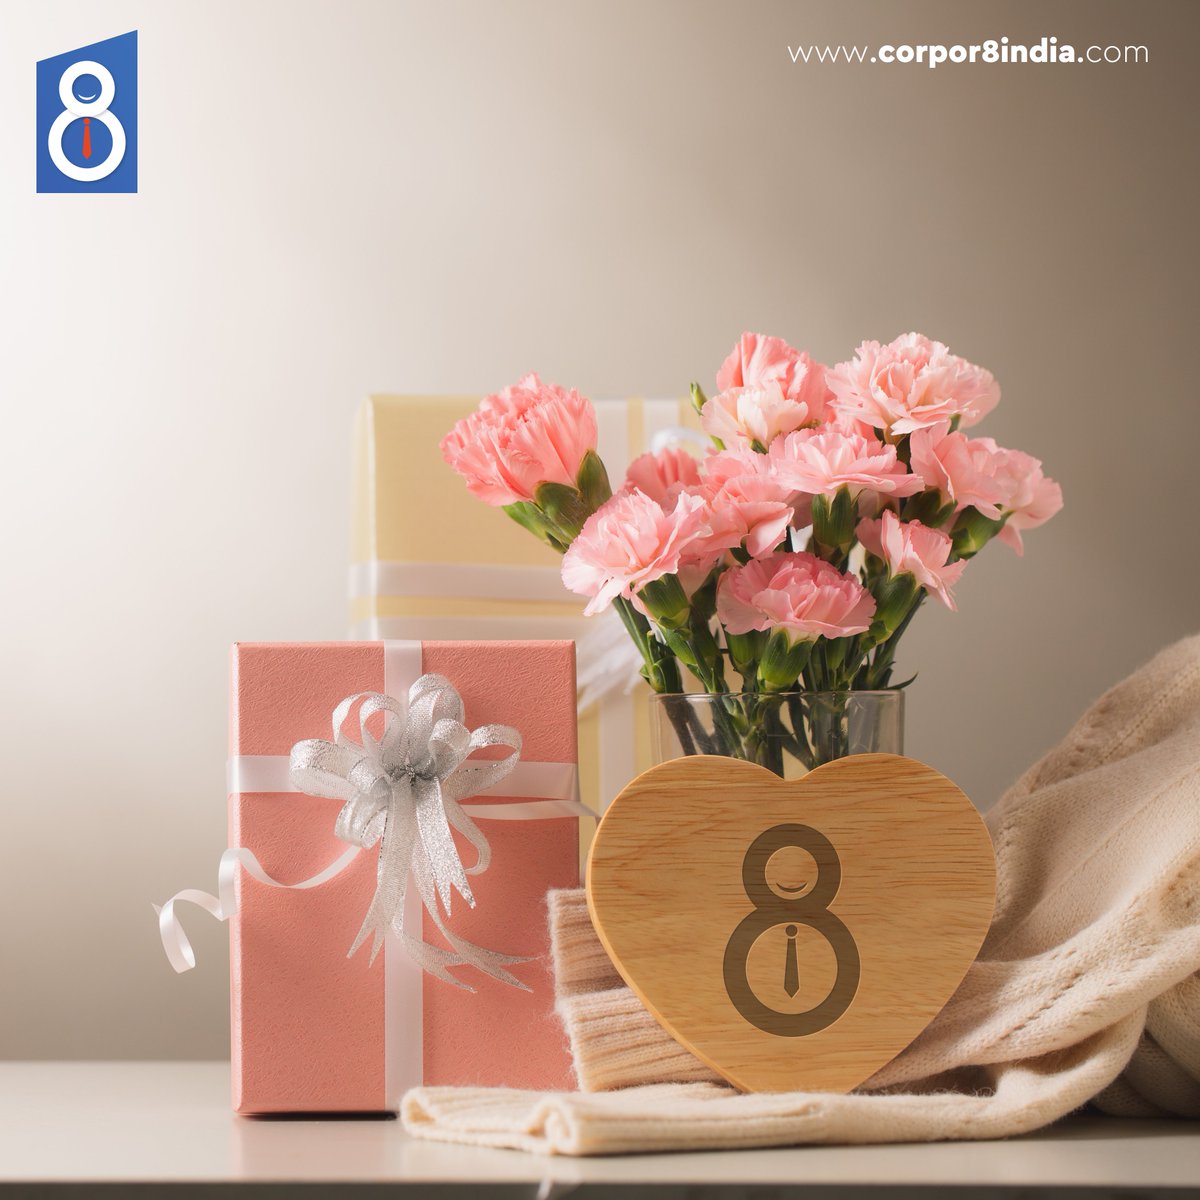 Celebrating special moments with the perfect gift.
#corpor8india #giftideas, #giftingseason, #giftguide, #giftbox, #giftsforall,#ComingSoon, #StayTuned,#corporategifting, #corporategiftingsolutions, #corporategiftideas, #delhi #india #twitter